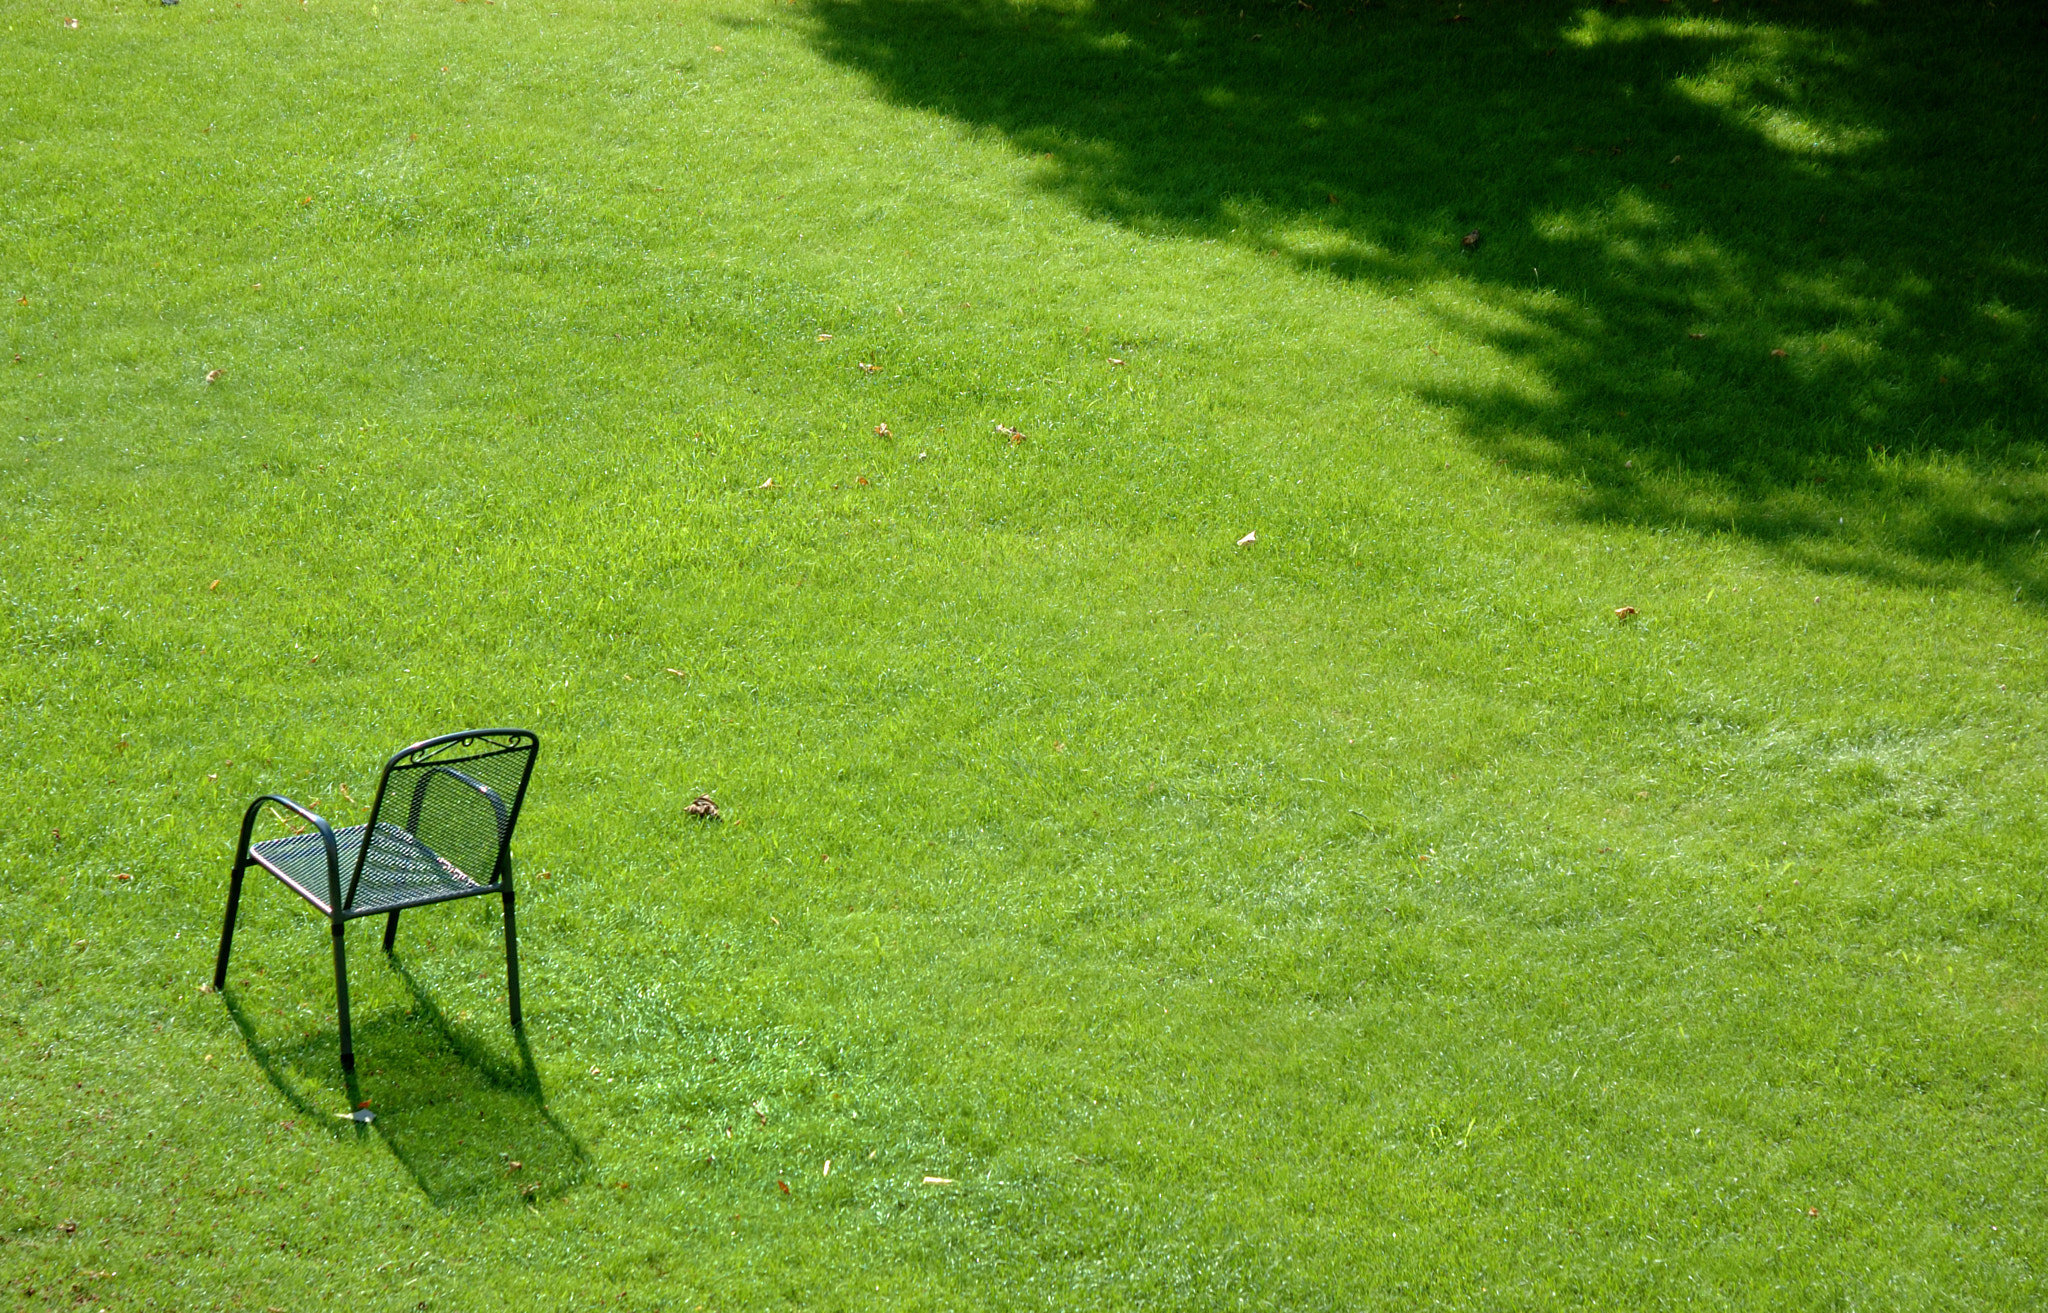 Nikon D70 sample photo. Chair in the green lawn photography